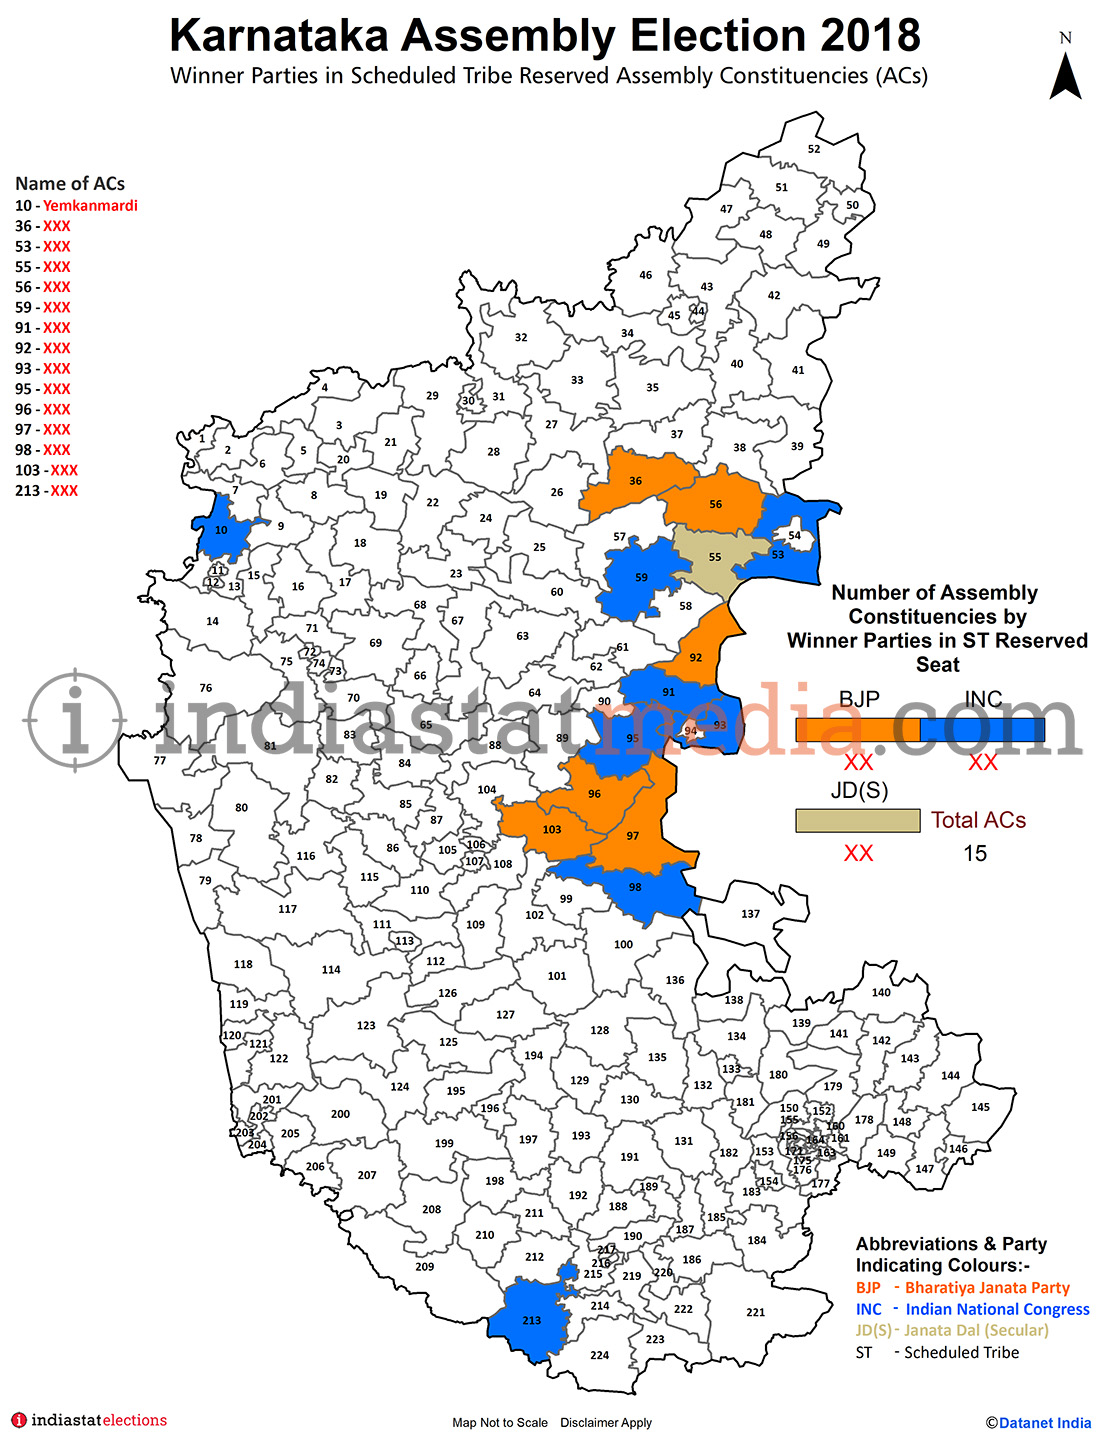 Winner Parties in Scheduled Tribe (ST) Reserved Assembly Constituencies Karnataka Assembly Election - 2018